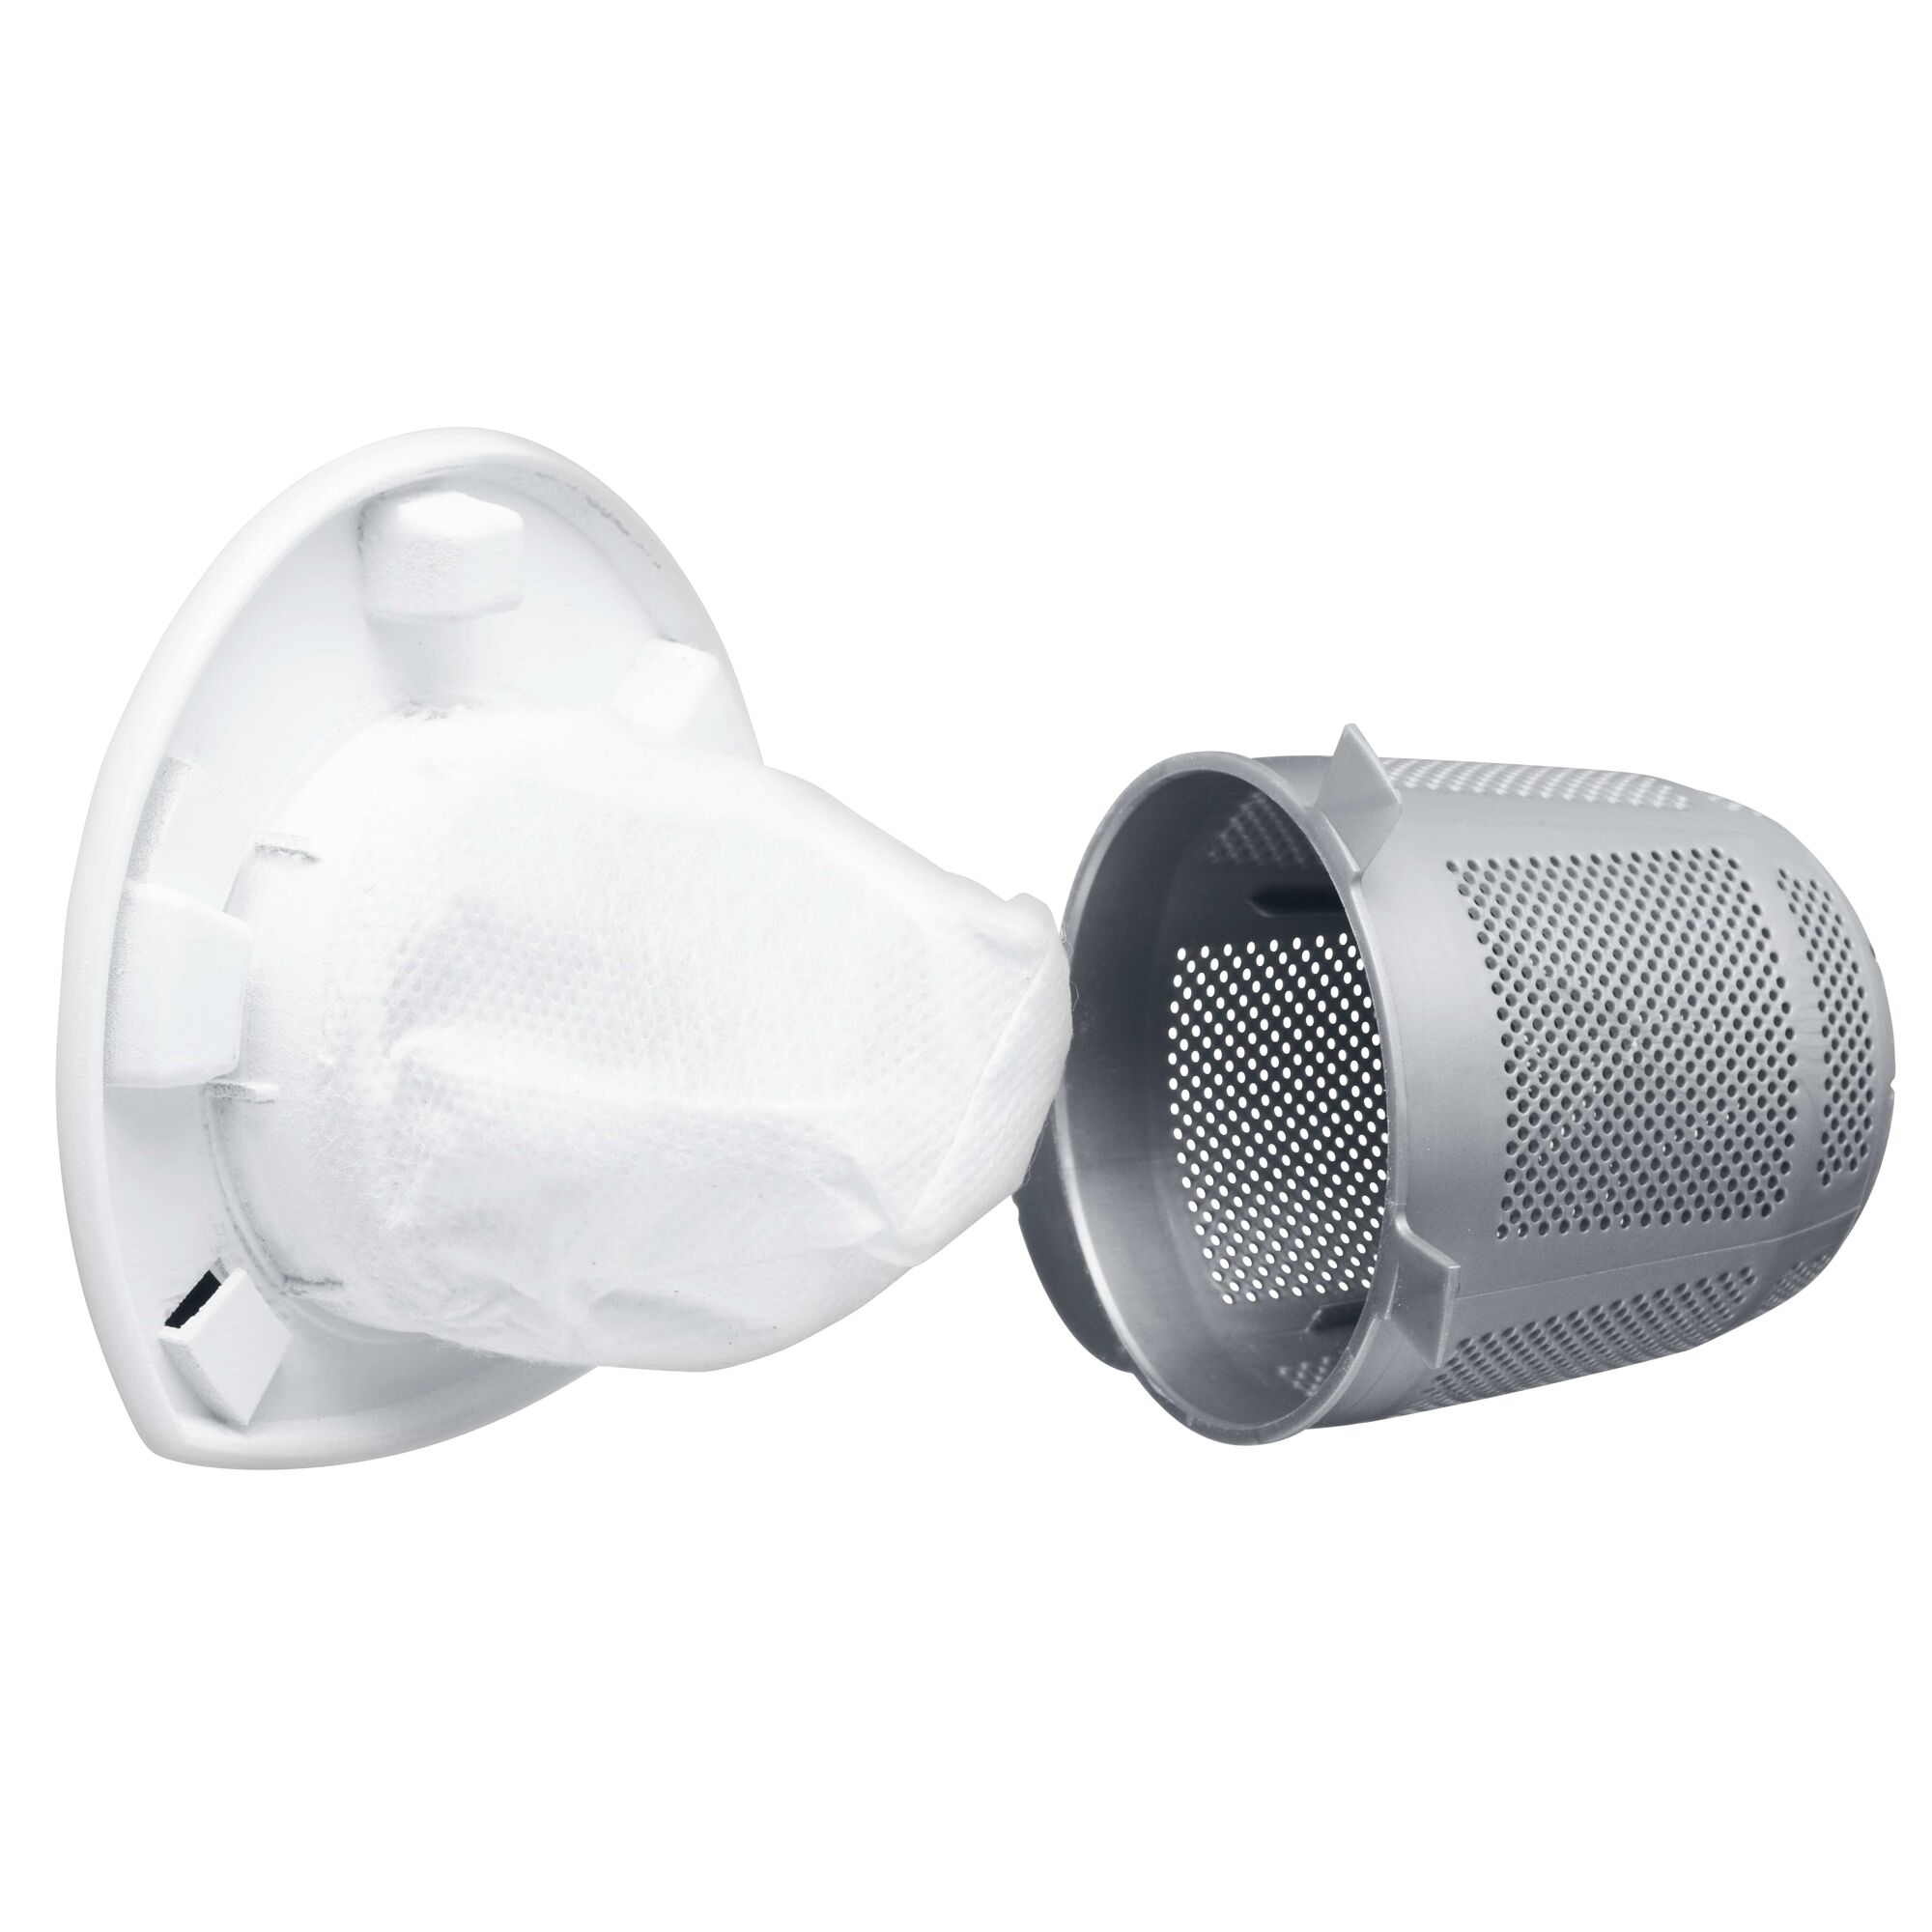 dustbuster hand vacuum replacement filter.